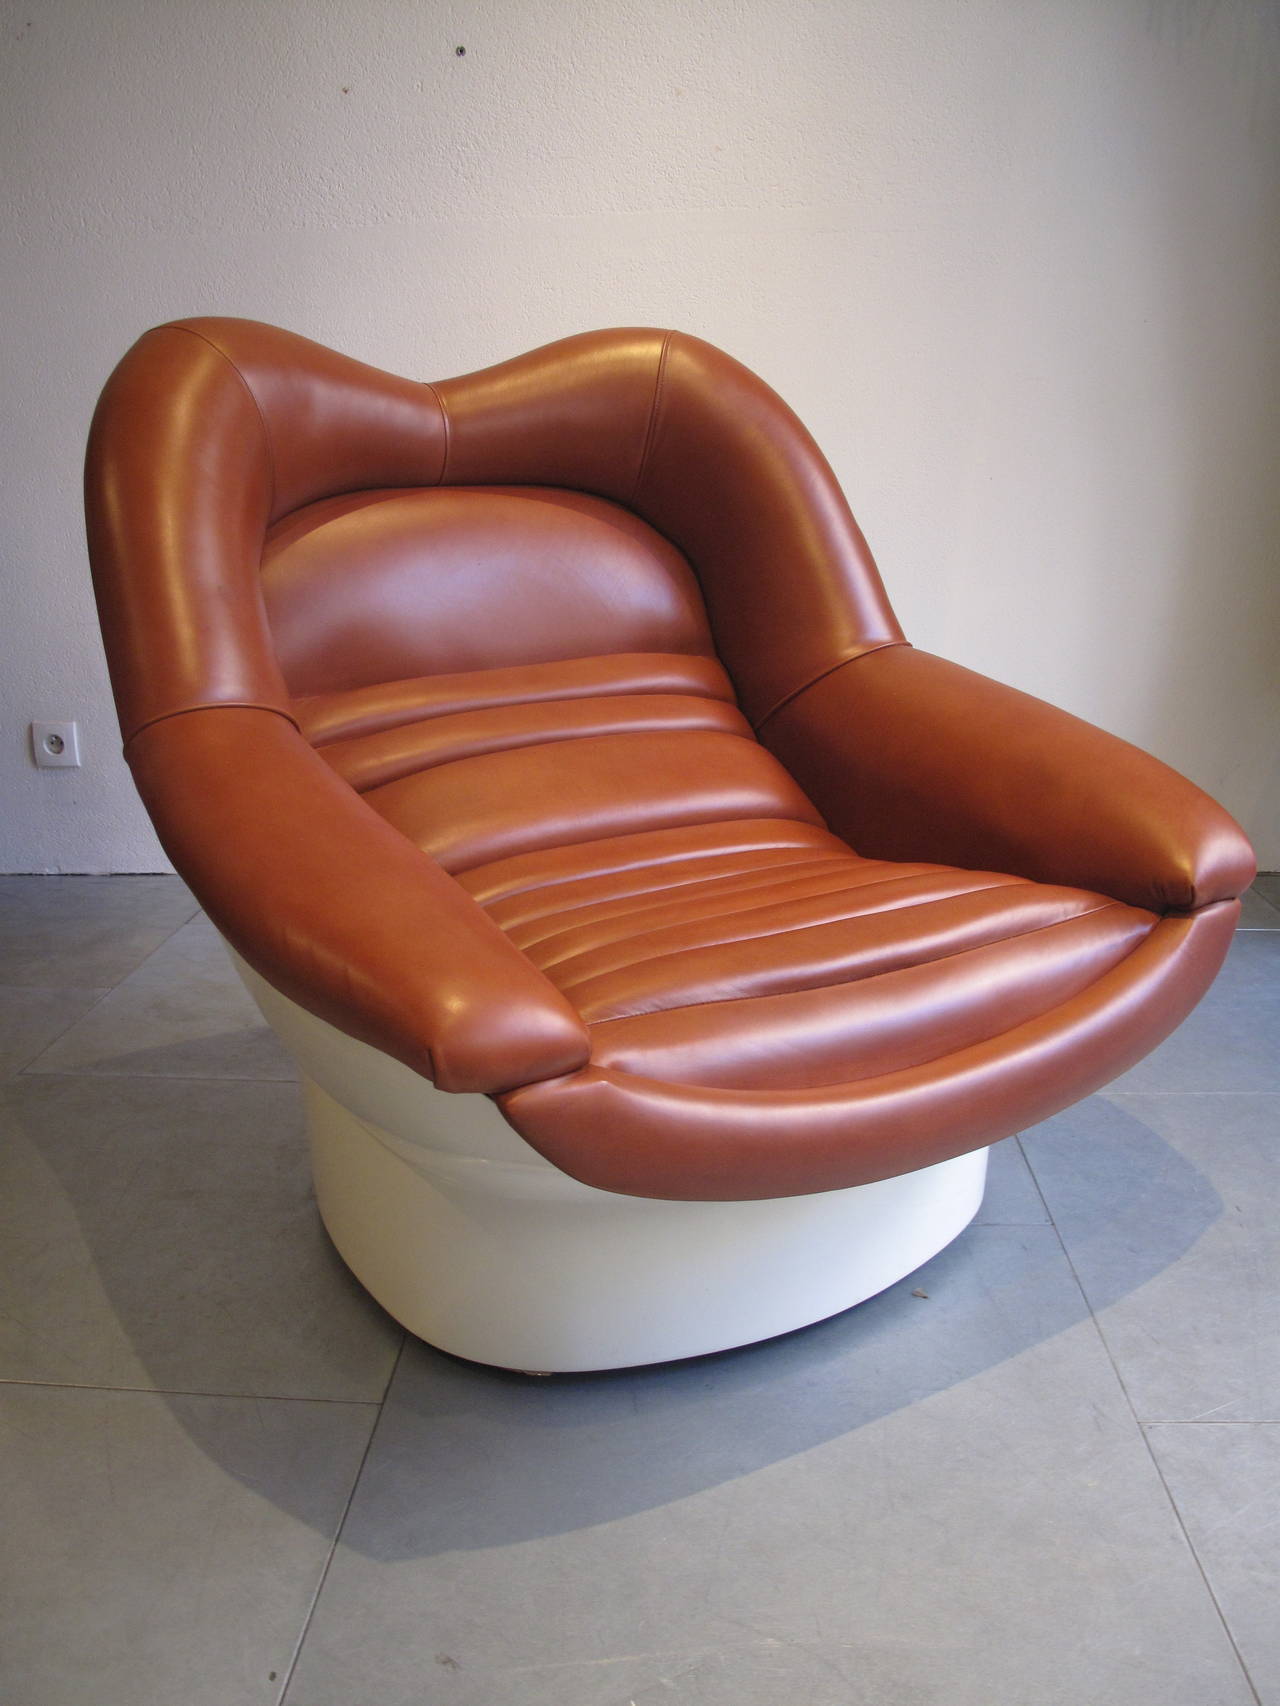 Cesare Casati Alda armchair 1966 for Comfort

Alda lounge chair.
Designed by Cesare Casati and Enzo Hybsch in1966.
Manufactured by Comfort, Italy.
Fiberglass and leather
1966
. L: 90H: 86P: 105cm